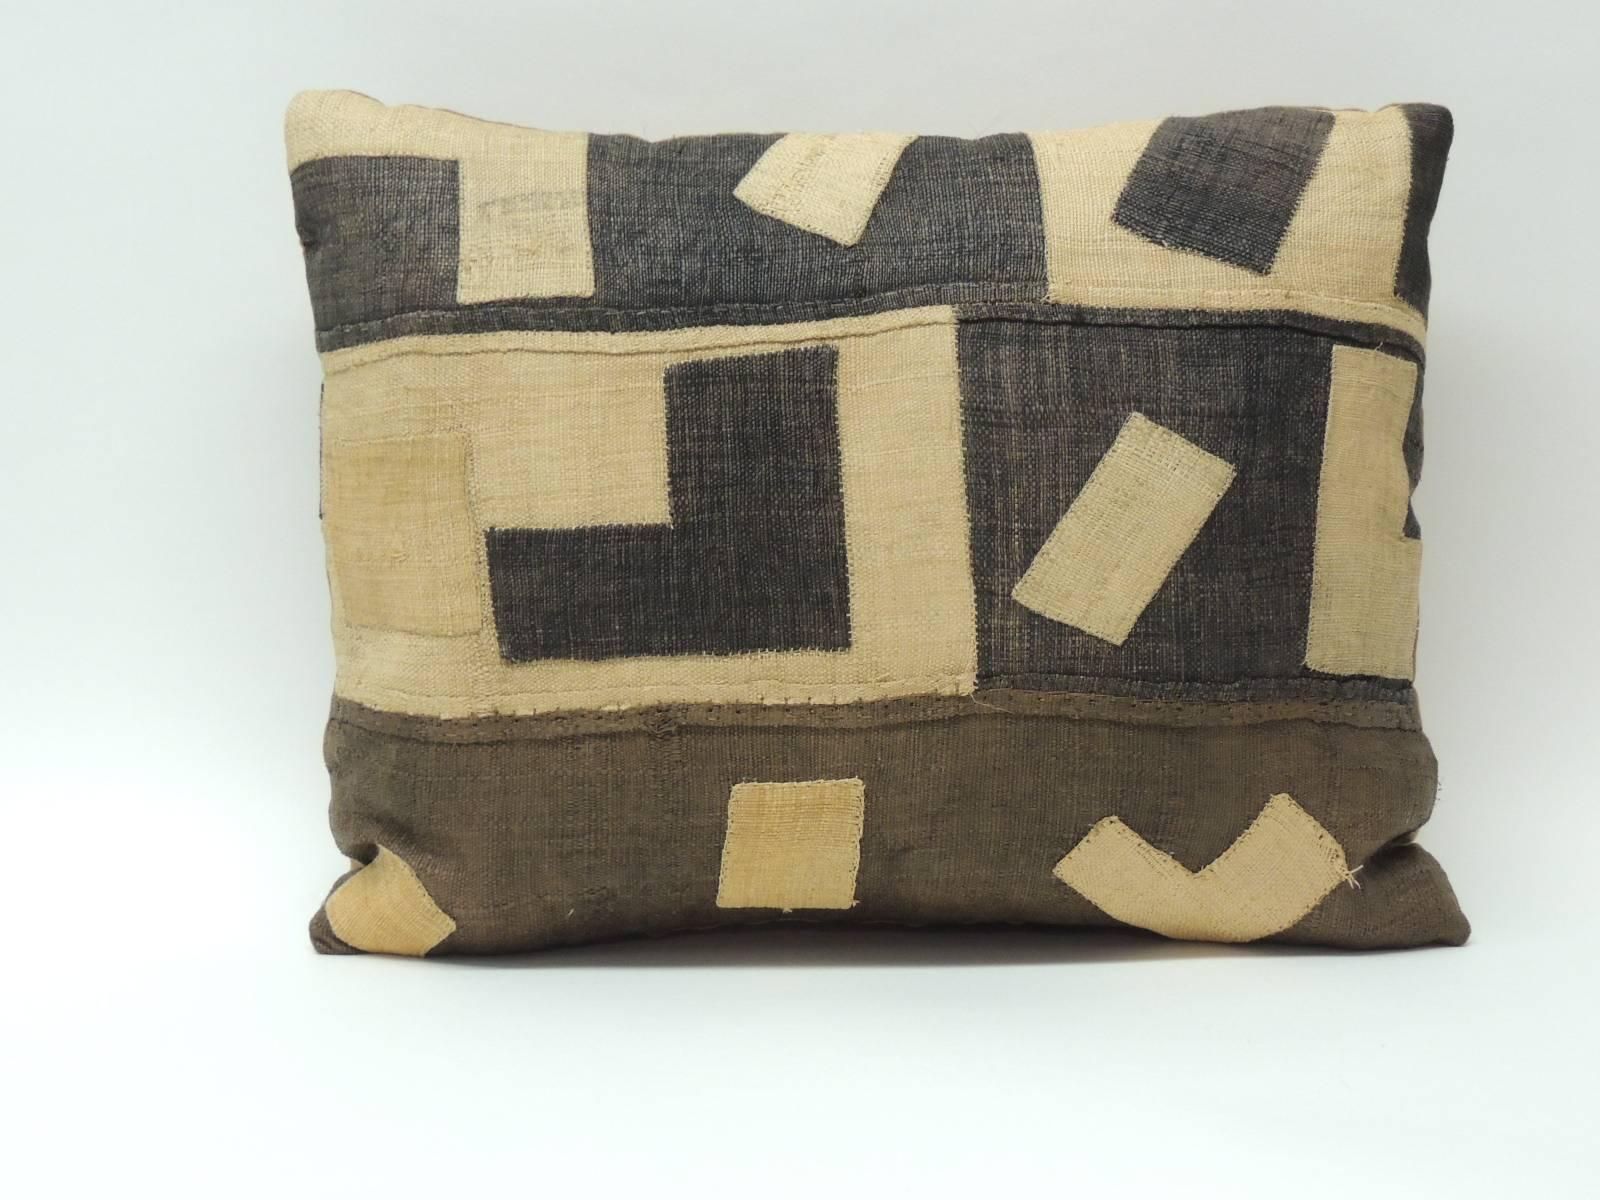 Antique Textiles Galleries:
African Kuba raffia patchwork appliqué lumbar pillow. This Boho-chic style pillow depicts an amazing tribal design. Artisanal textured fragment in shades of brown, black, natural with a tan vintage cotton backing.  Throw